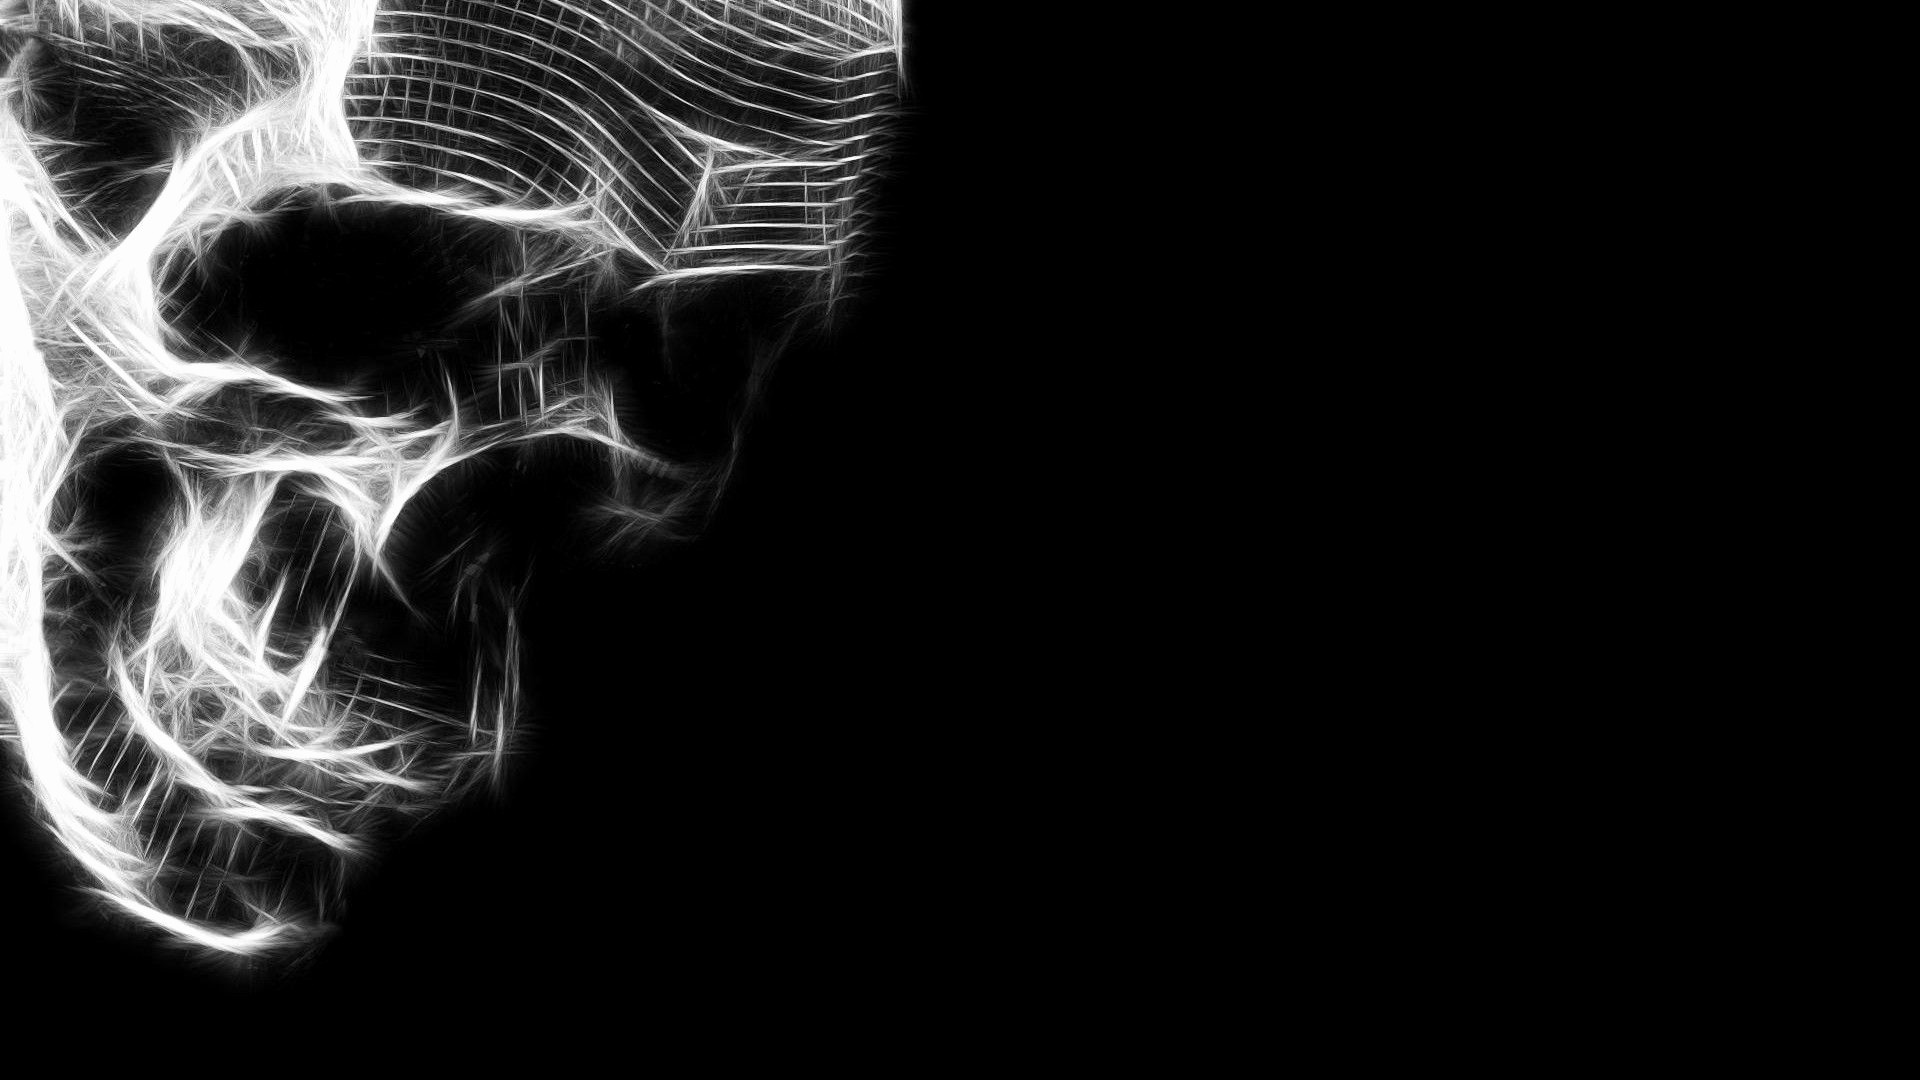 The Punisher Skull Wallpaper Comic Wallpapers 14226 - Cool Wallpapers Hd 1080p Black And White , HD Wallpaper & Backgrounds